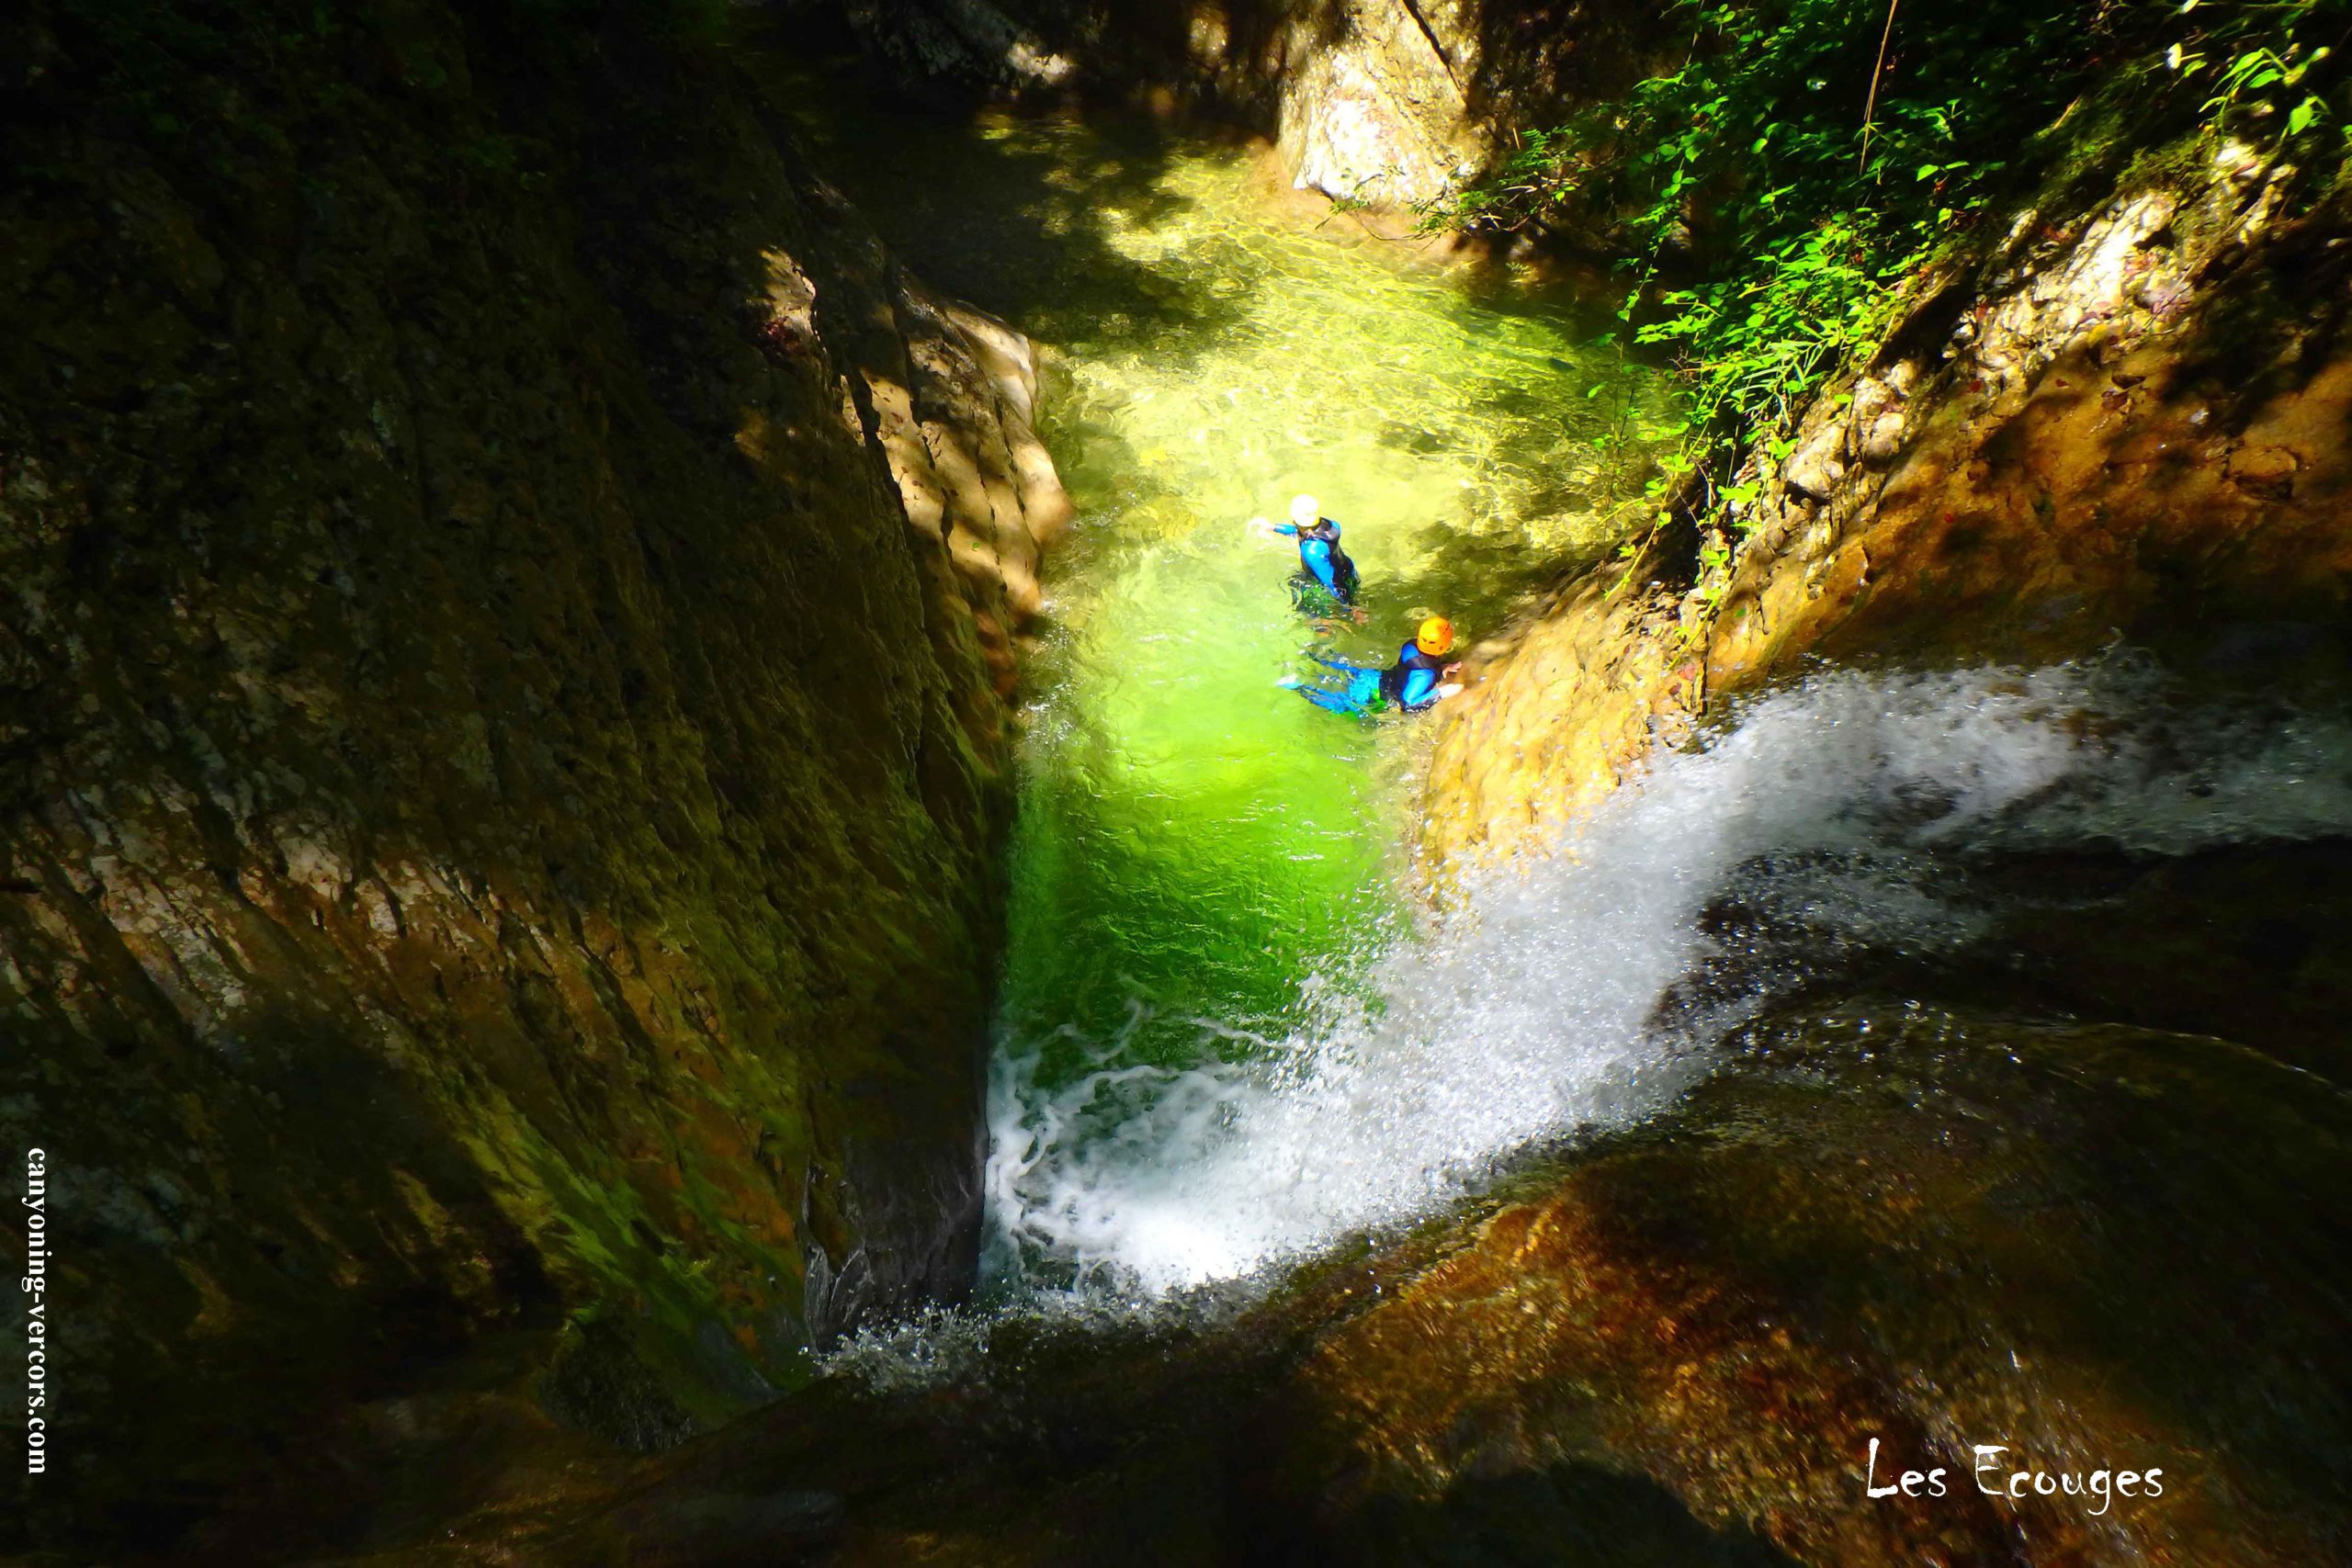 Les Ecouges Canyoning Vercors